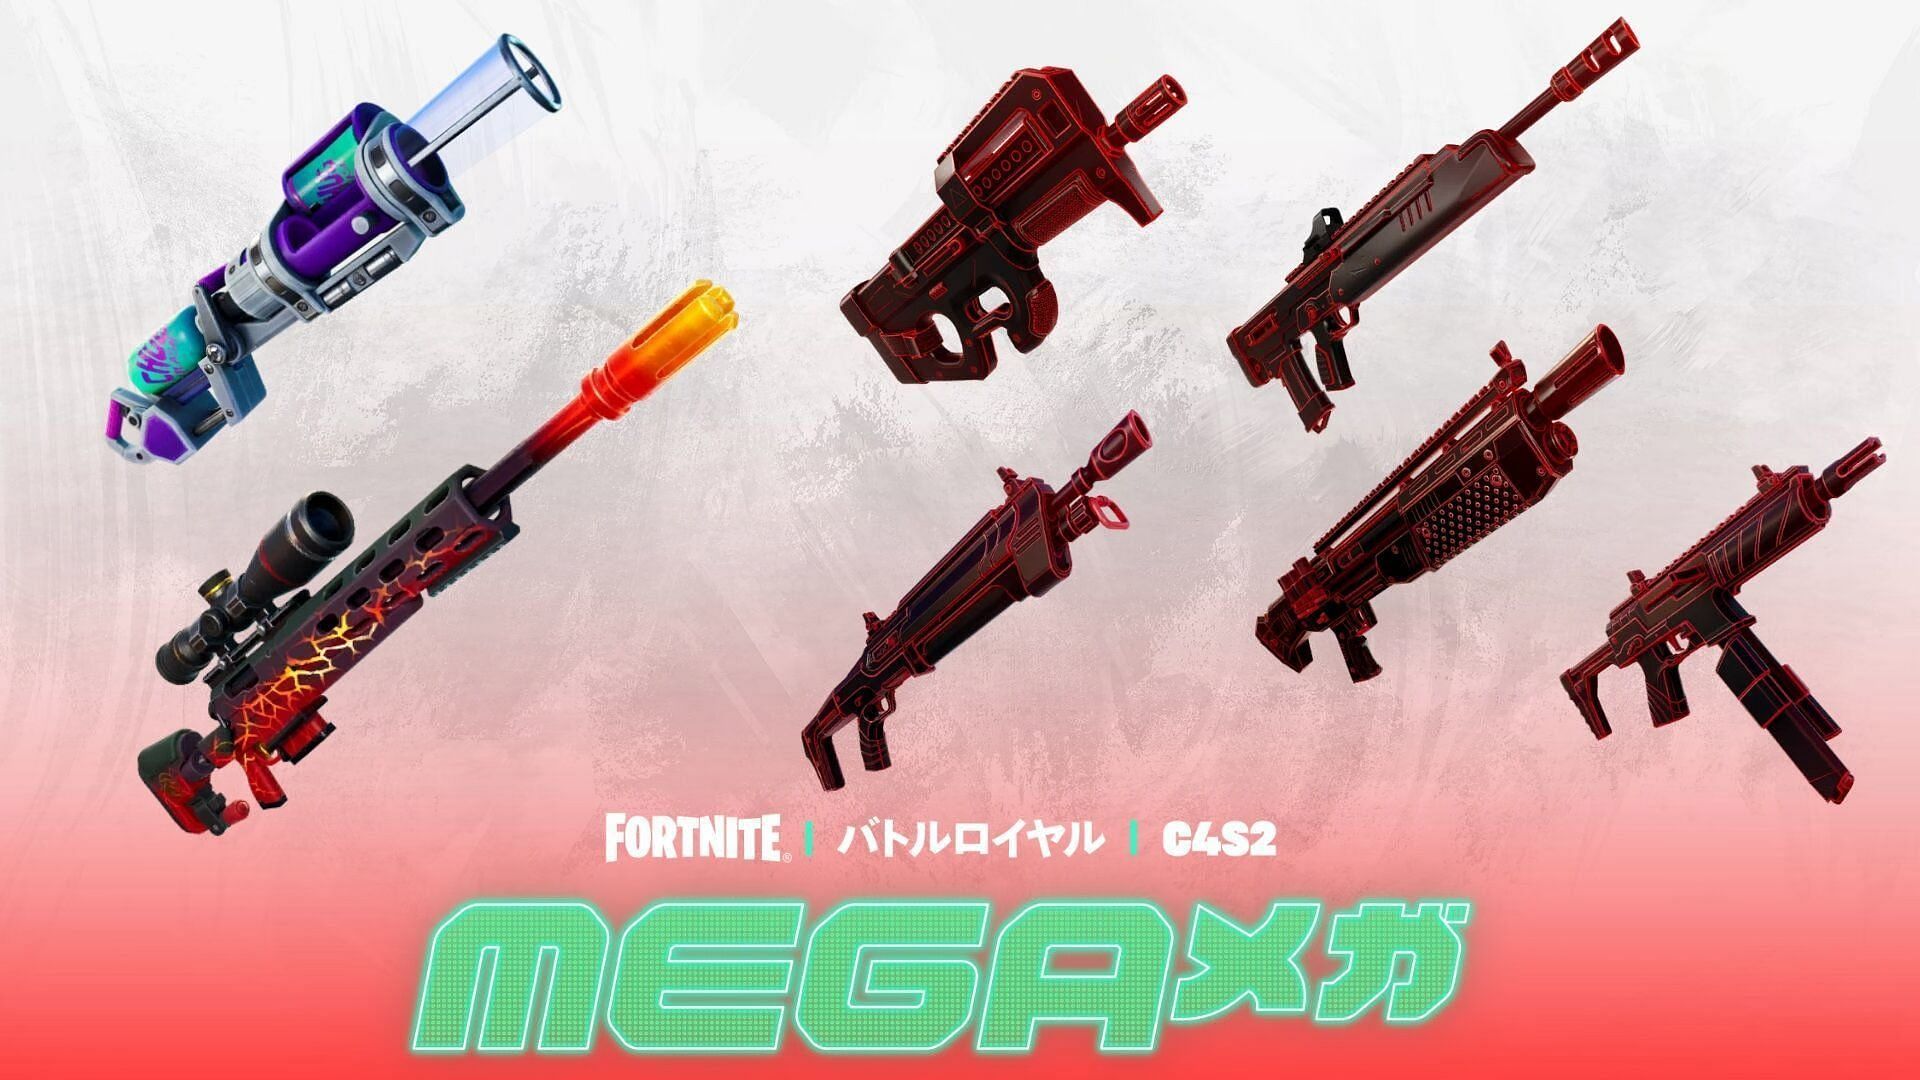 All Exotic weapons in Fortnite (Image via Epic Games)